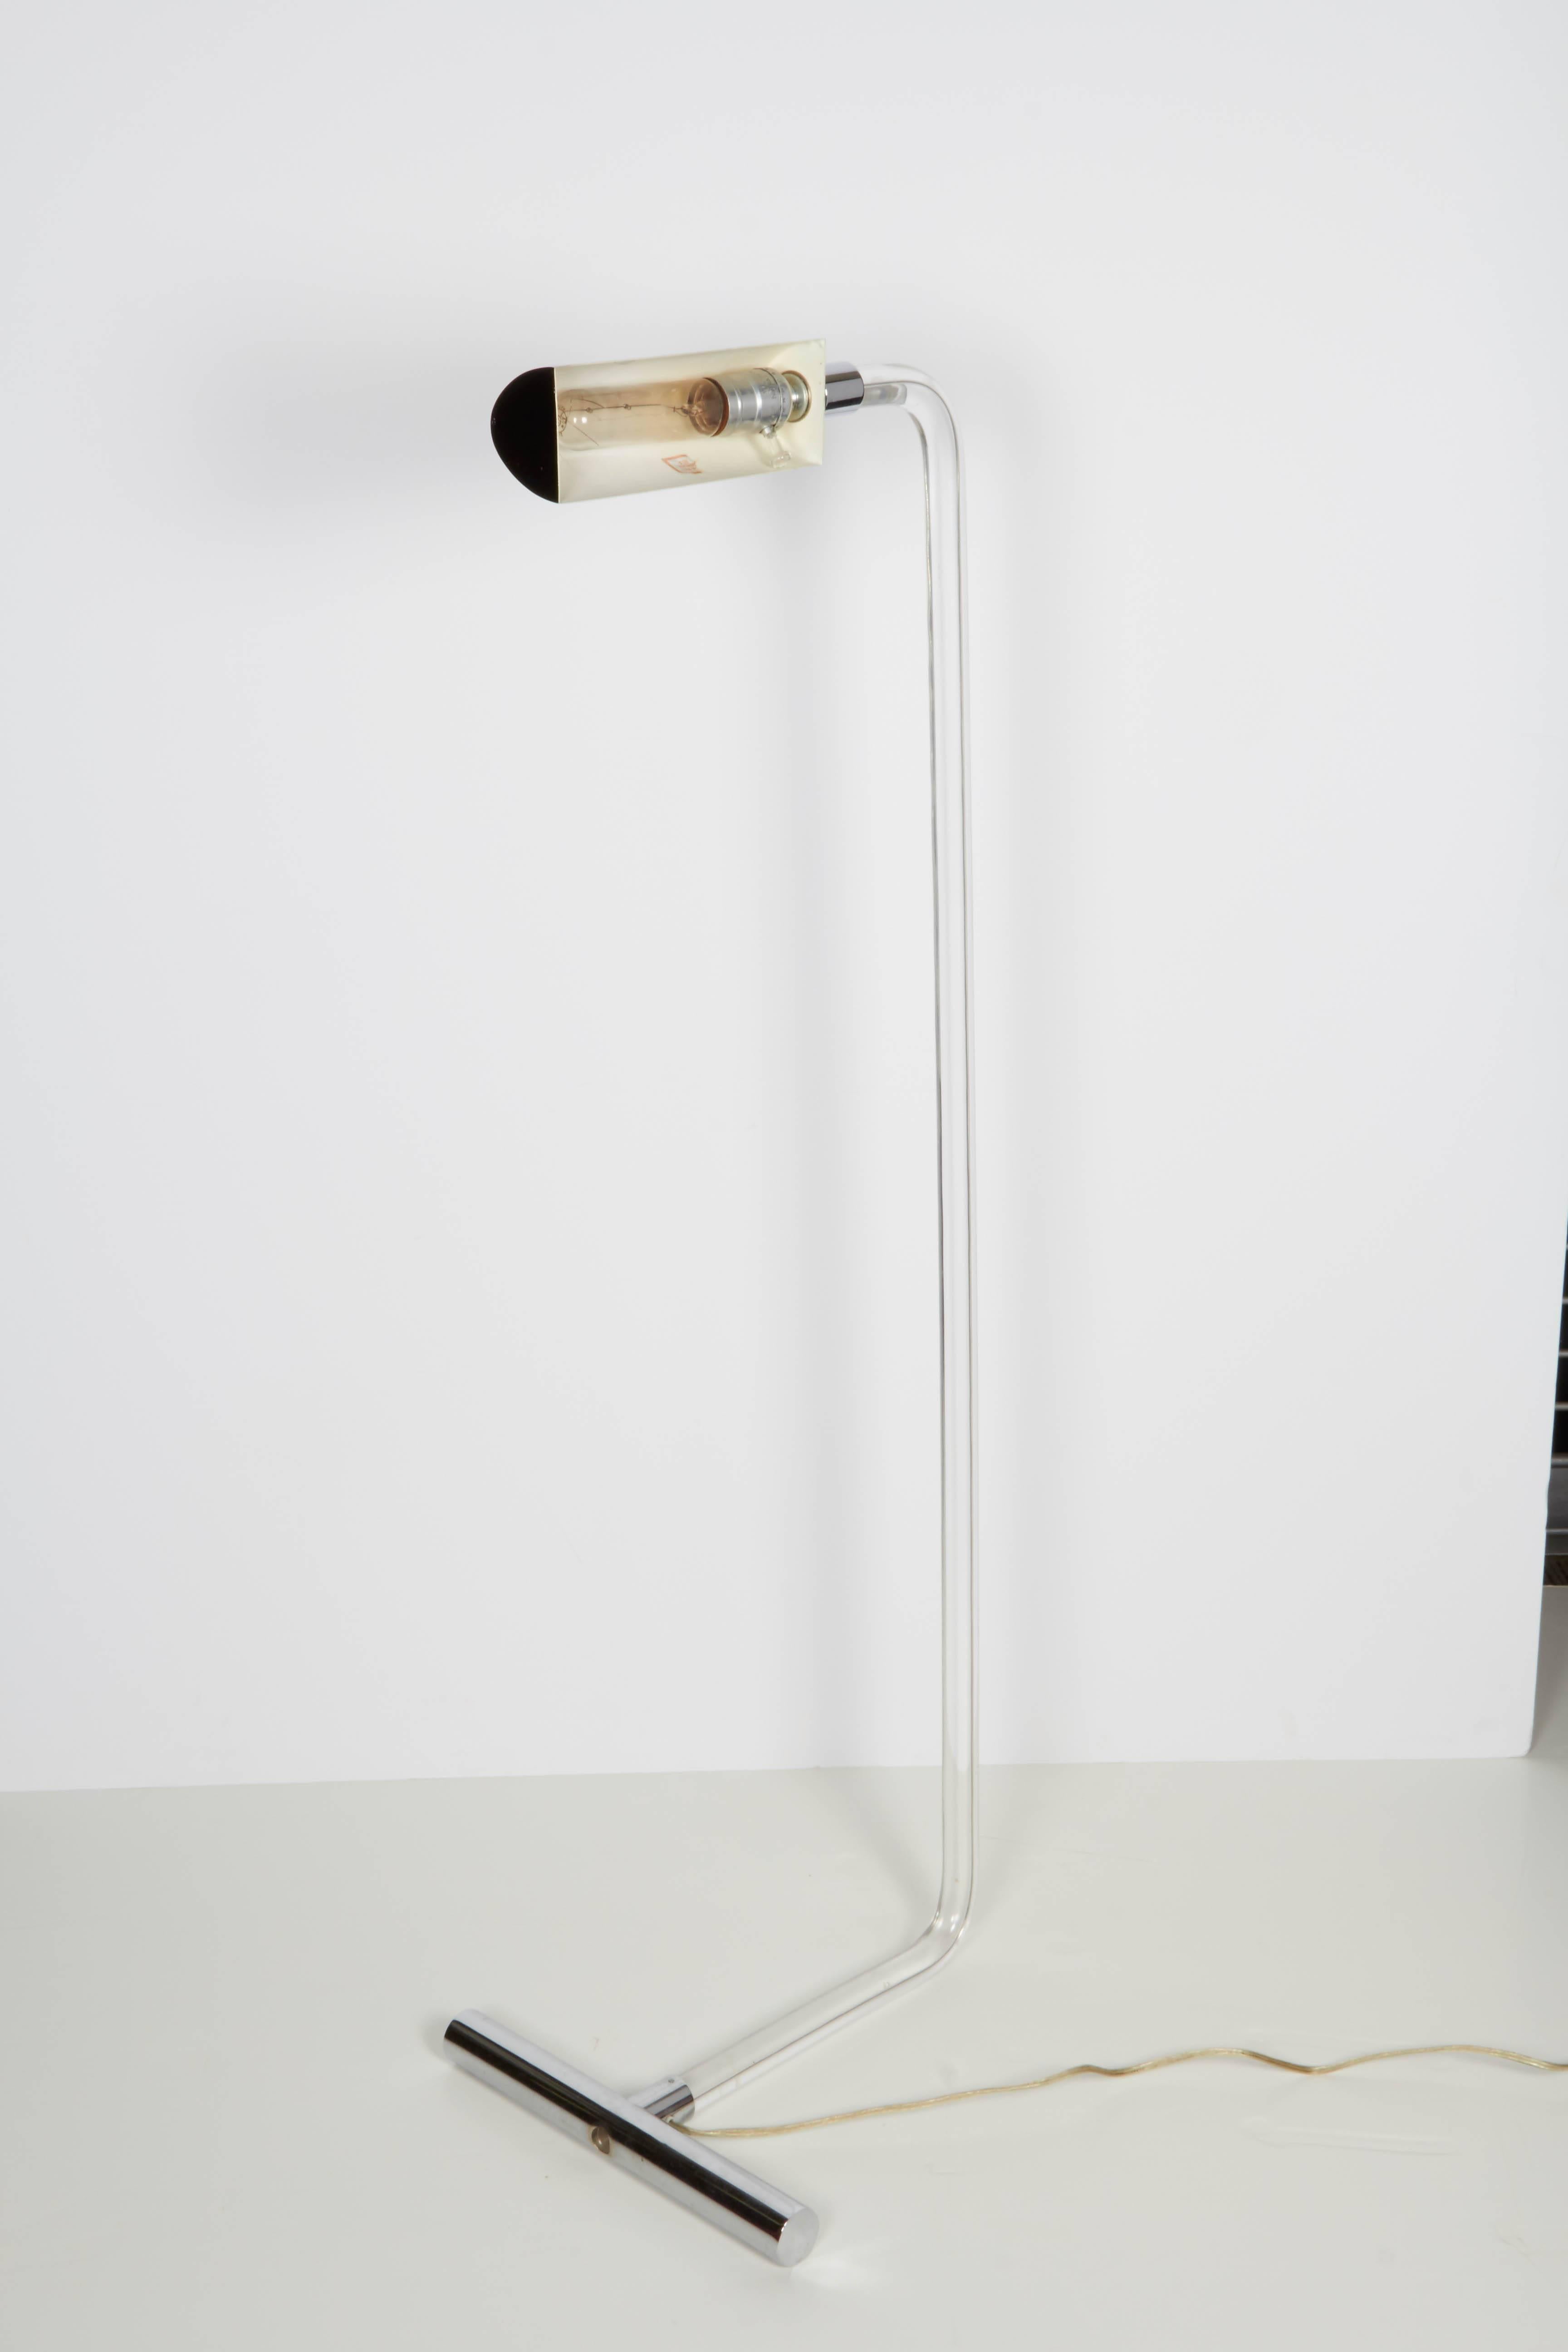 A highly linear floor lamp by designer Peter Hamburger, produced, circa 1970s for the Crylicord series, with curved stem in Lucite, cylindrical shade and base (as counterbalance) in polished chrome. Requires a single bulb. Very good vintage